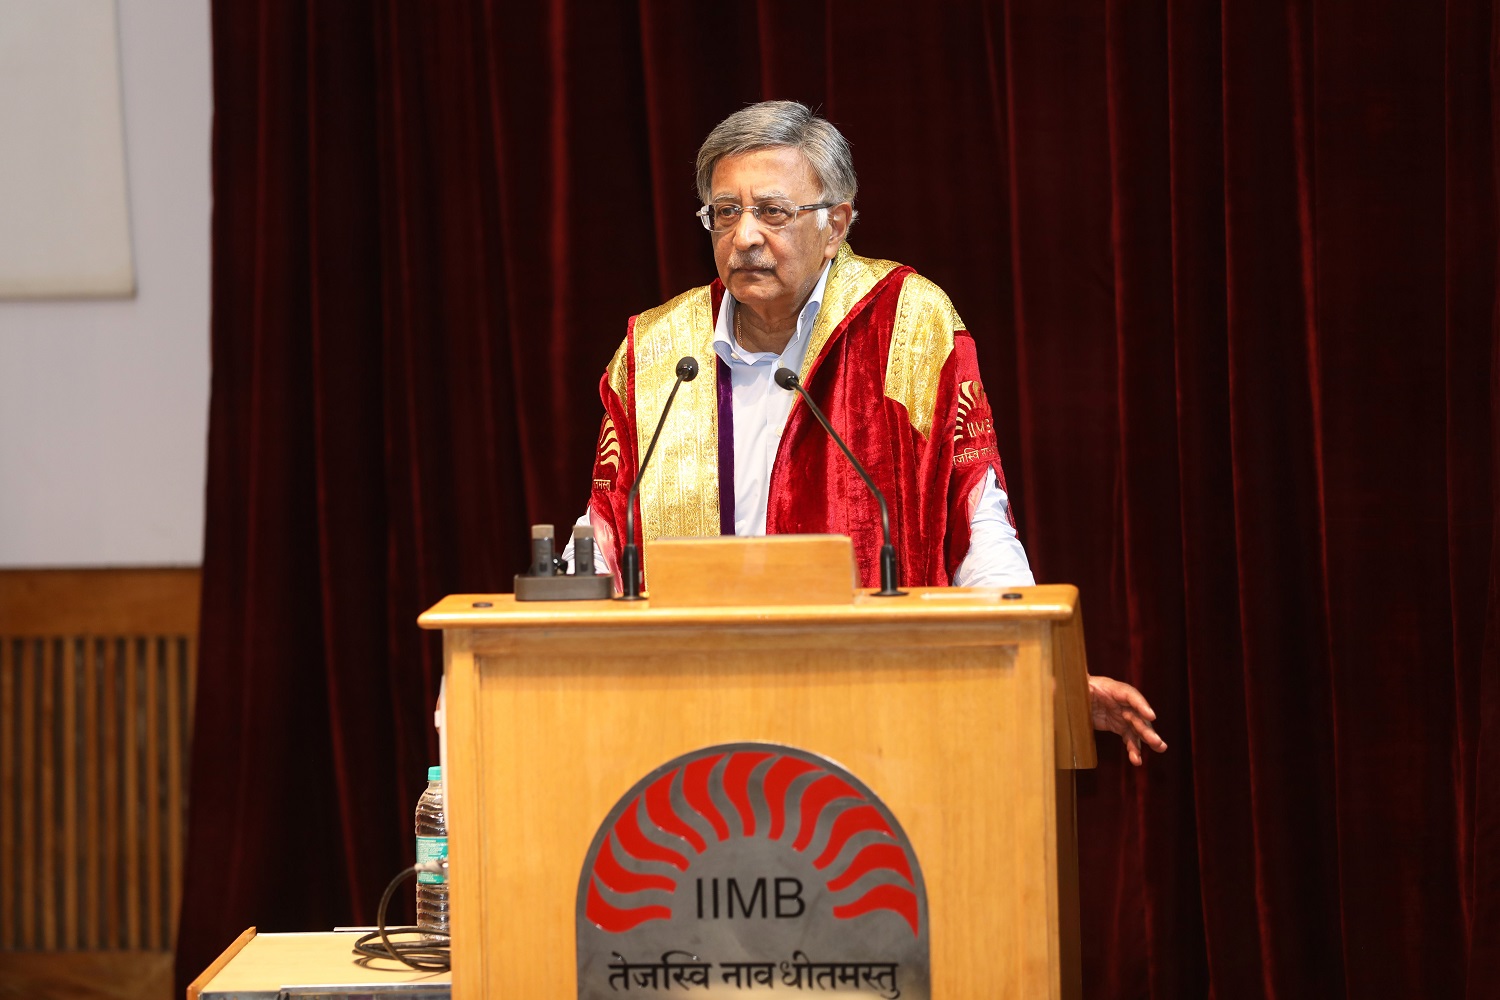 Baba Kalyani, Chairman and Managing Director of Bharat Forge Limited (BFL), delivers his special address on ‘Seizing India’s Moment’.